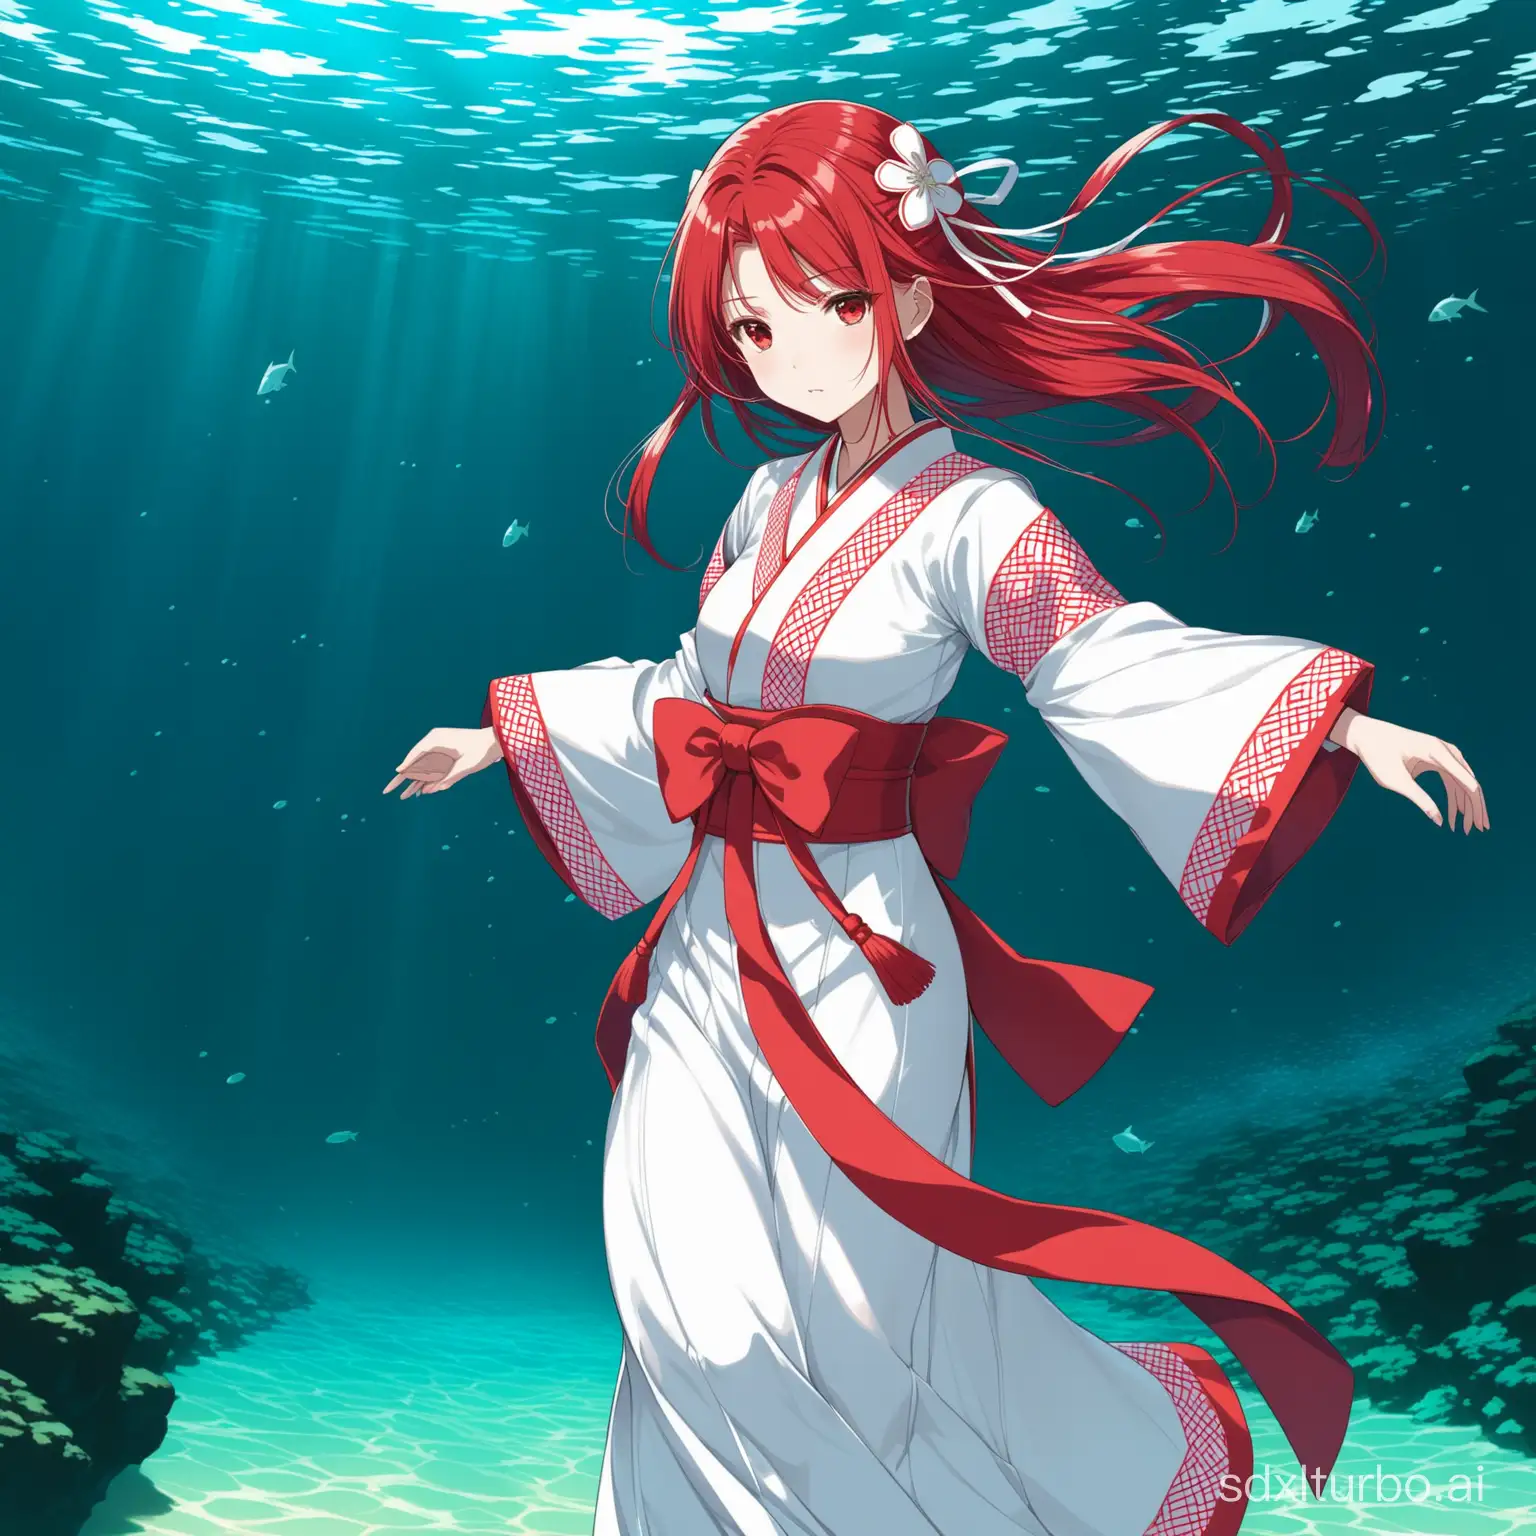 Uesugi erii Red hair, red eyes, shrine maiden outfit, expressionless, strolling underwater